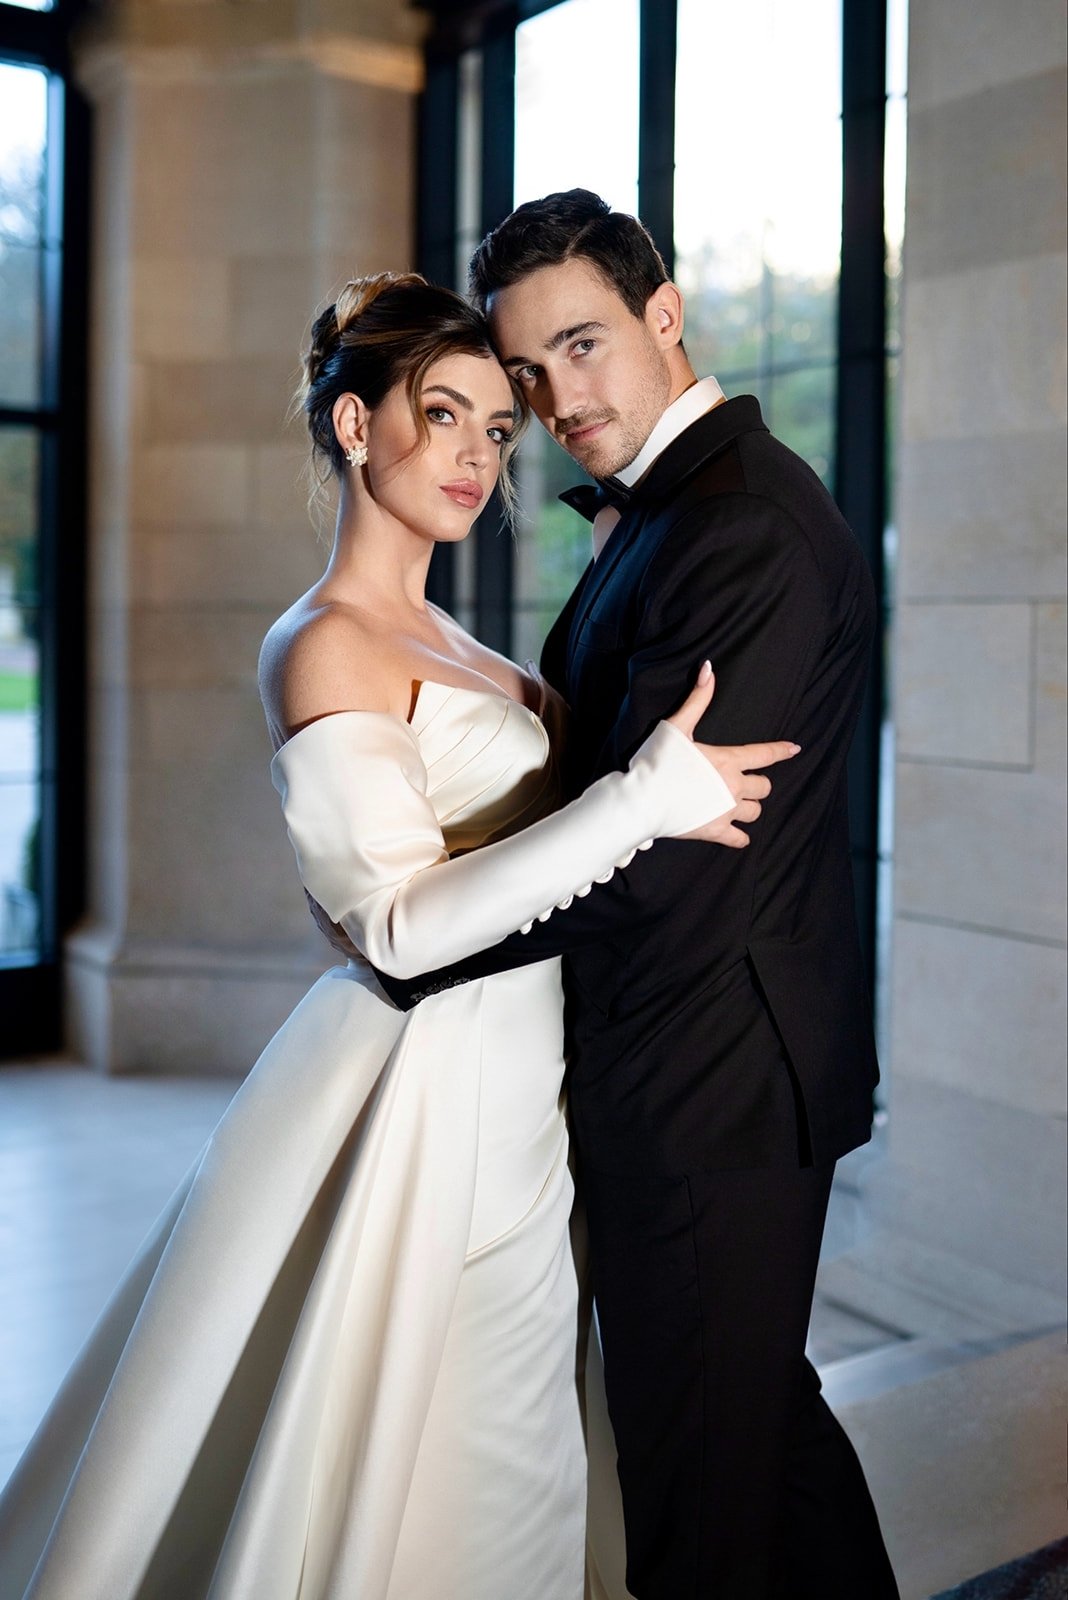 If you are getting married in a Chateau in Paris or anywhere in France, opting for timeless glamour is the way to go!

This means making a statement with a classic, striking look that appears to have come out of a magazine and perfectly suits your fe